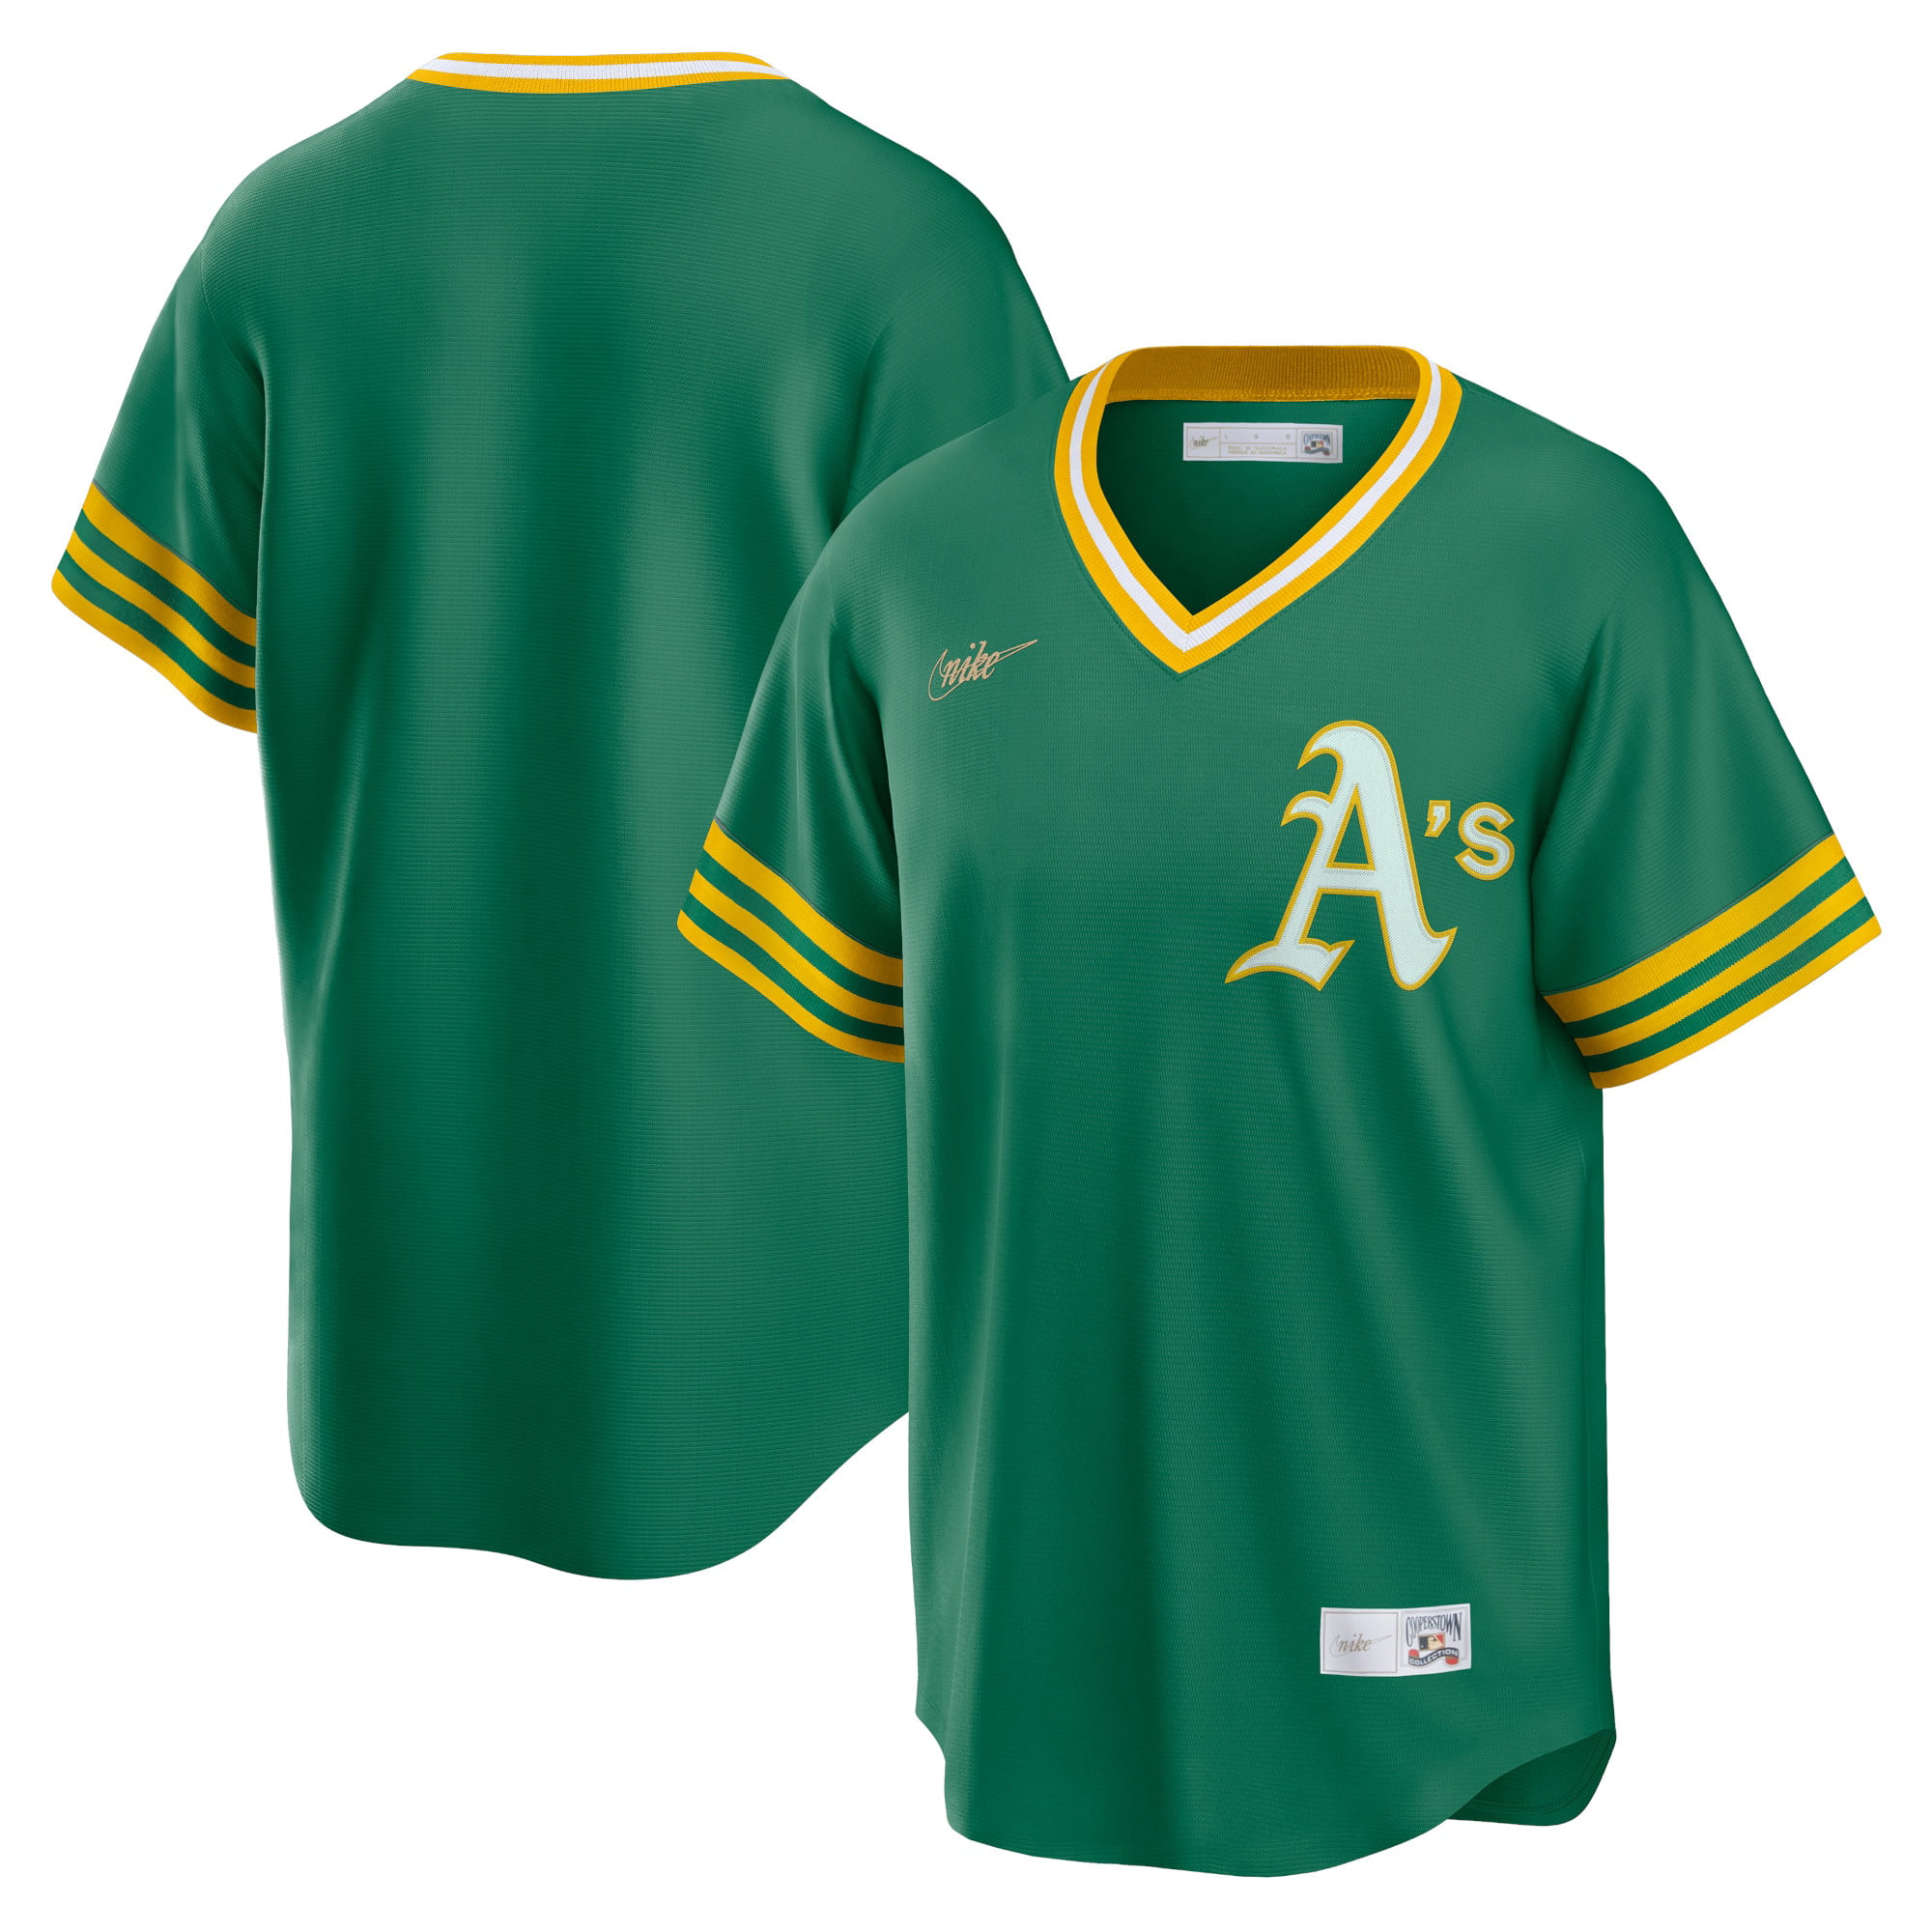 Nike Official Mlb Replica Alternate Oakland Athletics Jersey in Green